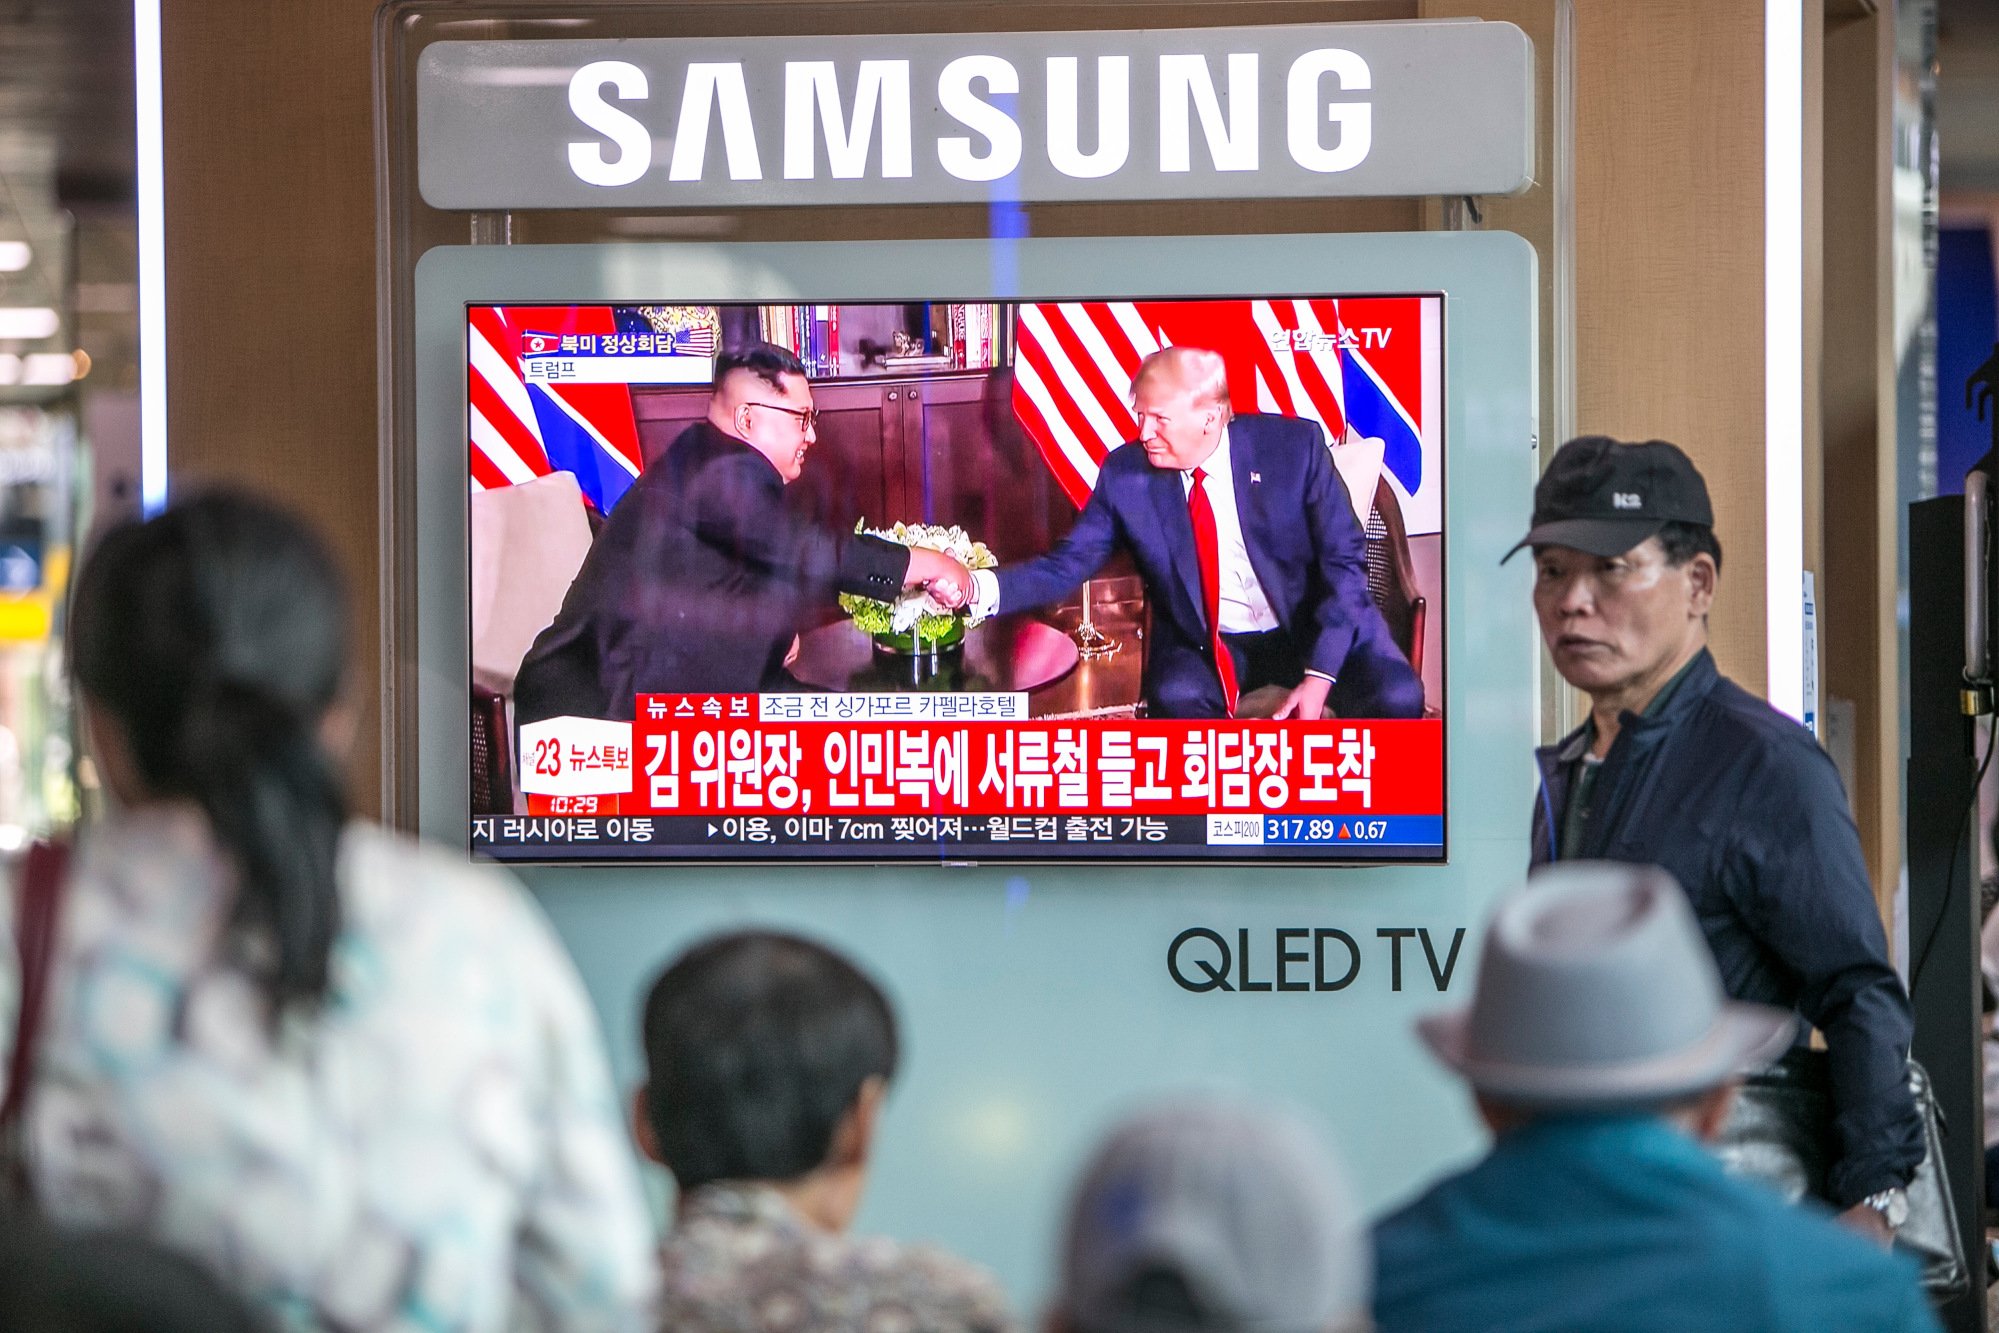 trump-kim meeting being watched by civilians on television